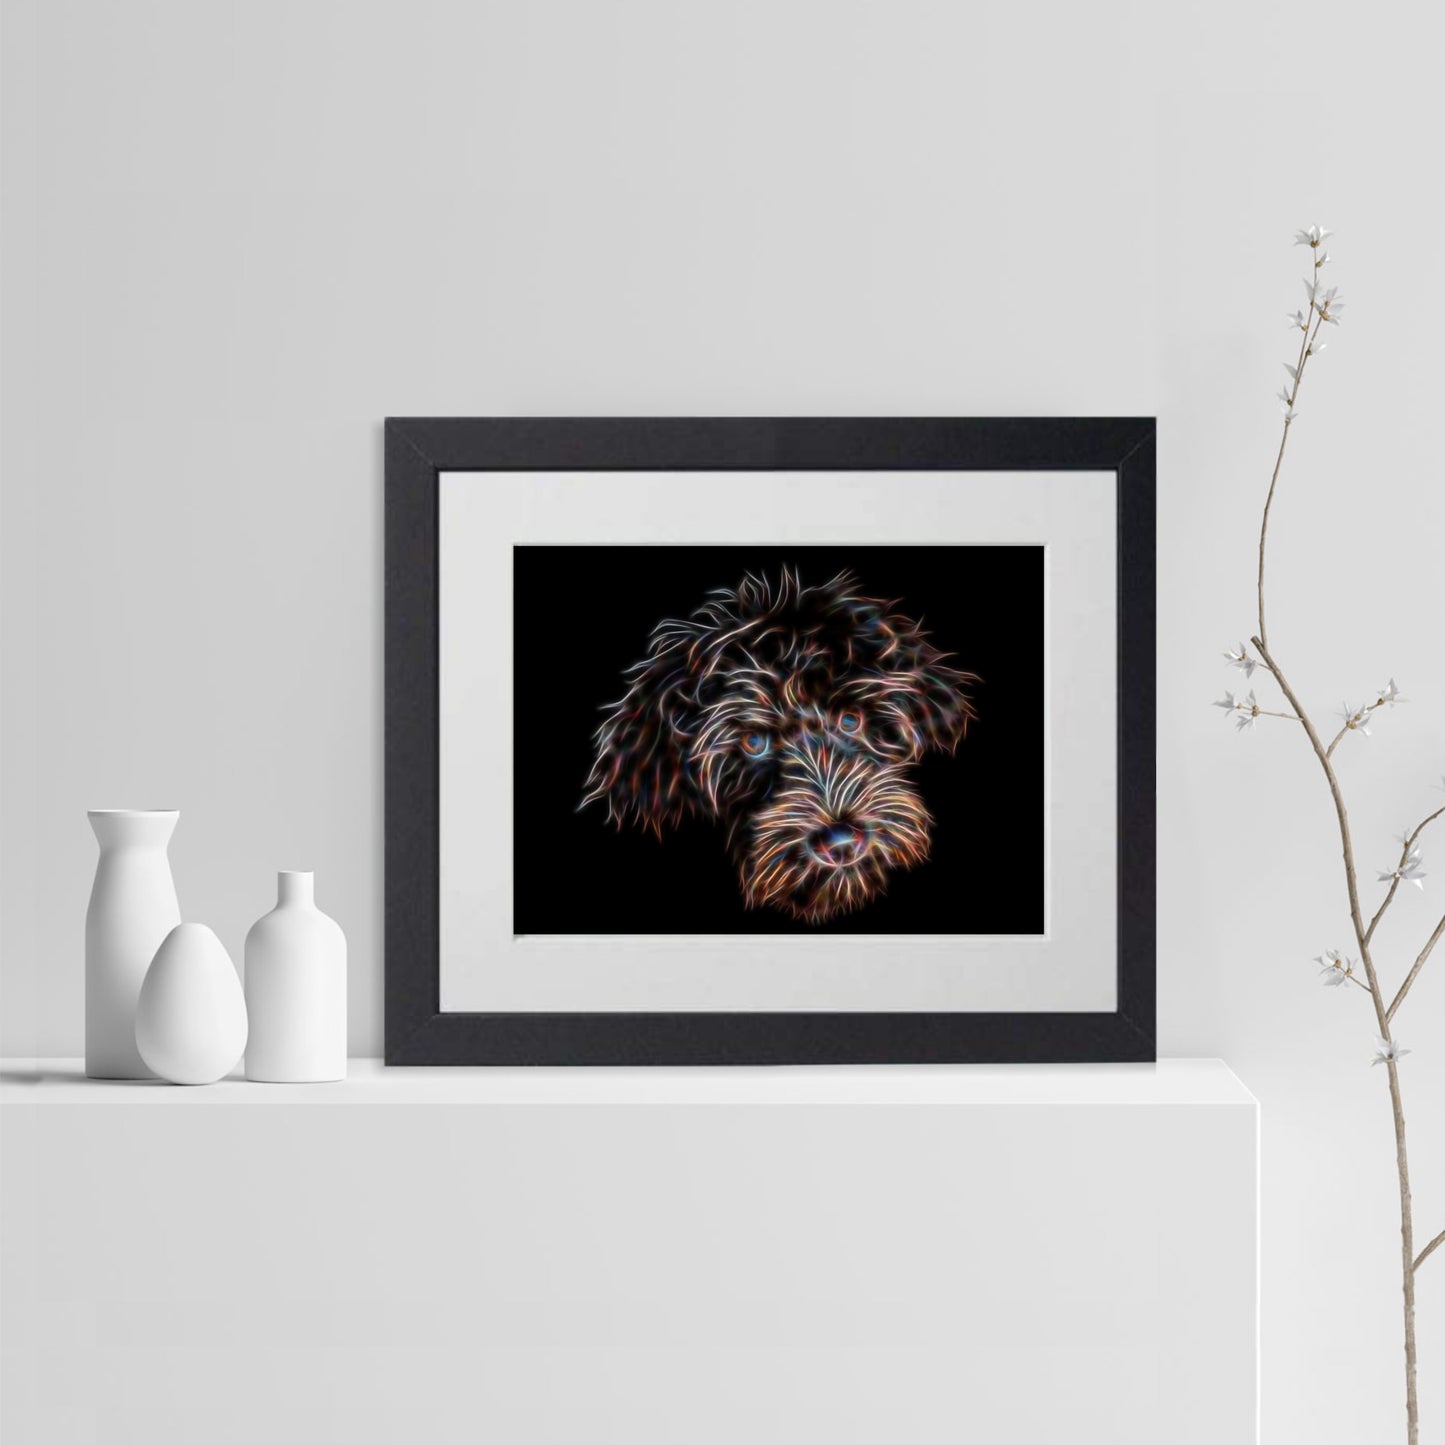 Chocolate Labradoodle Print with Stunning Fractal Art Design.